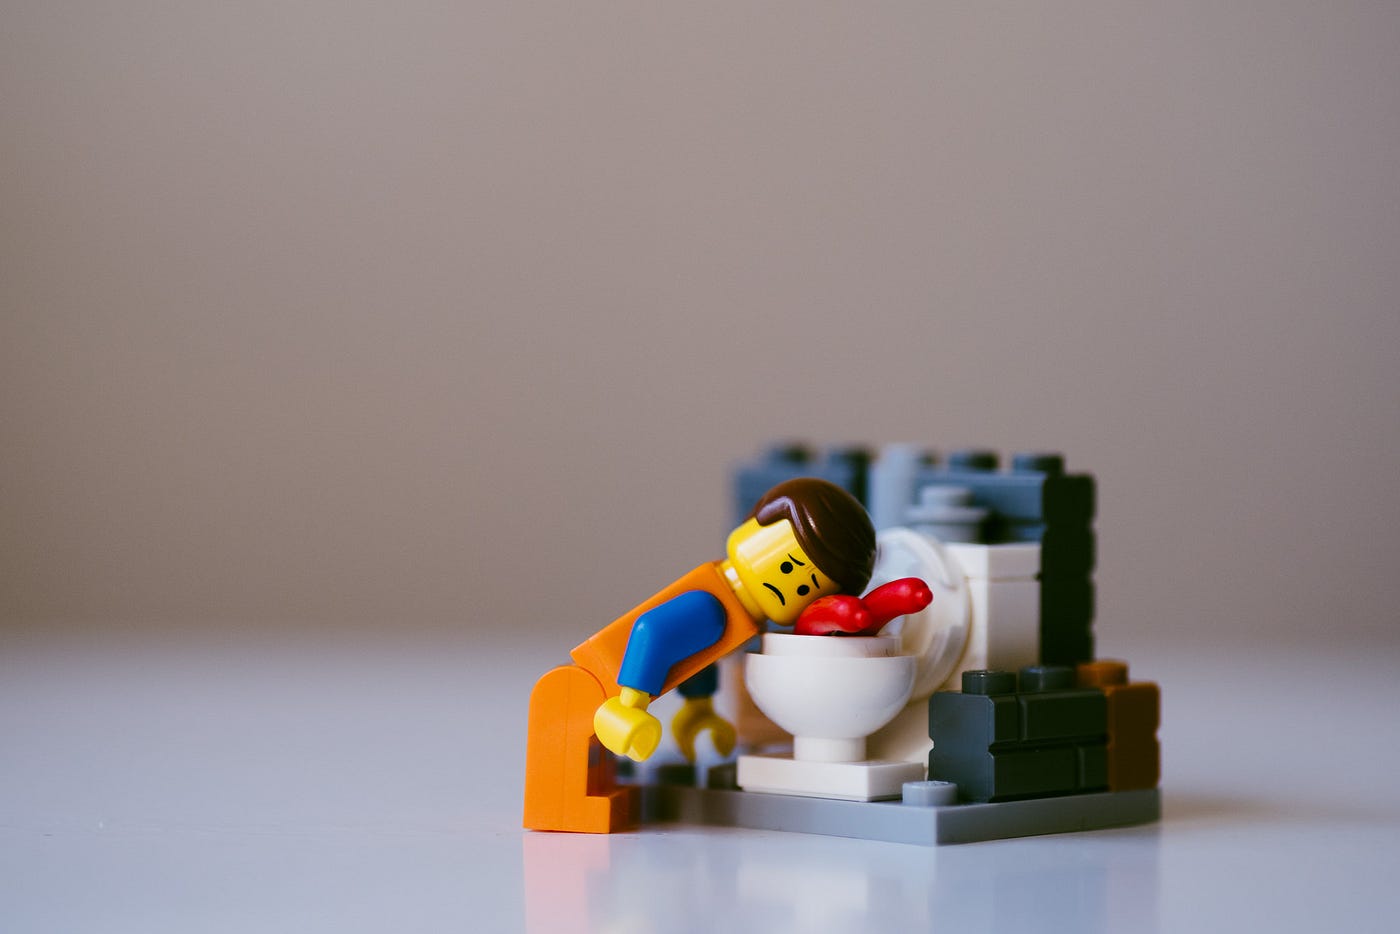 How LEGO helped me overcome professional burnout | by Daniel Cheung | Medium